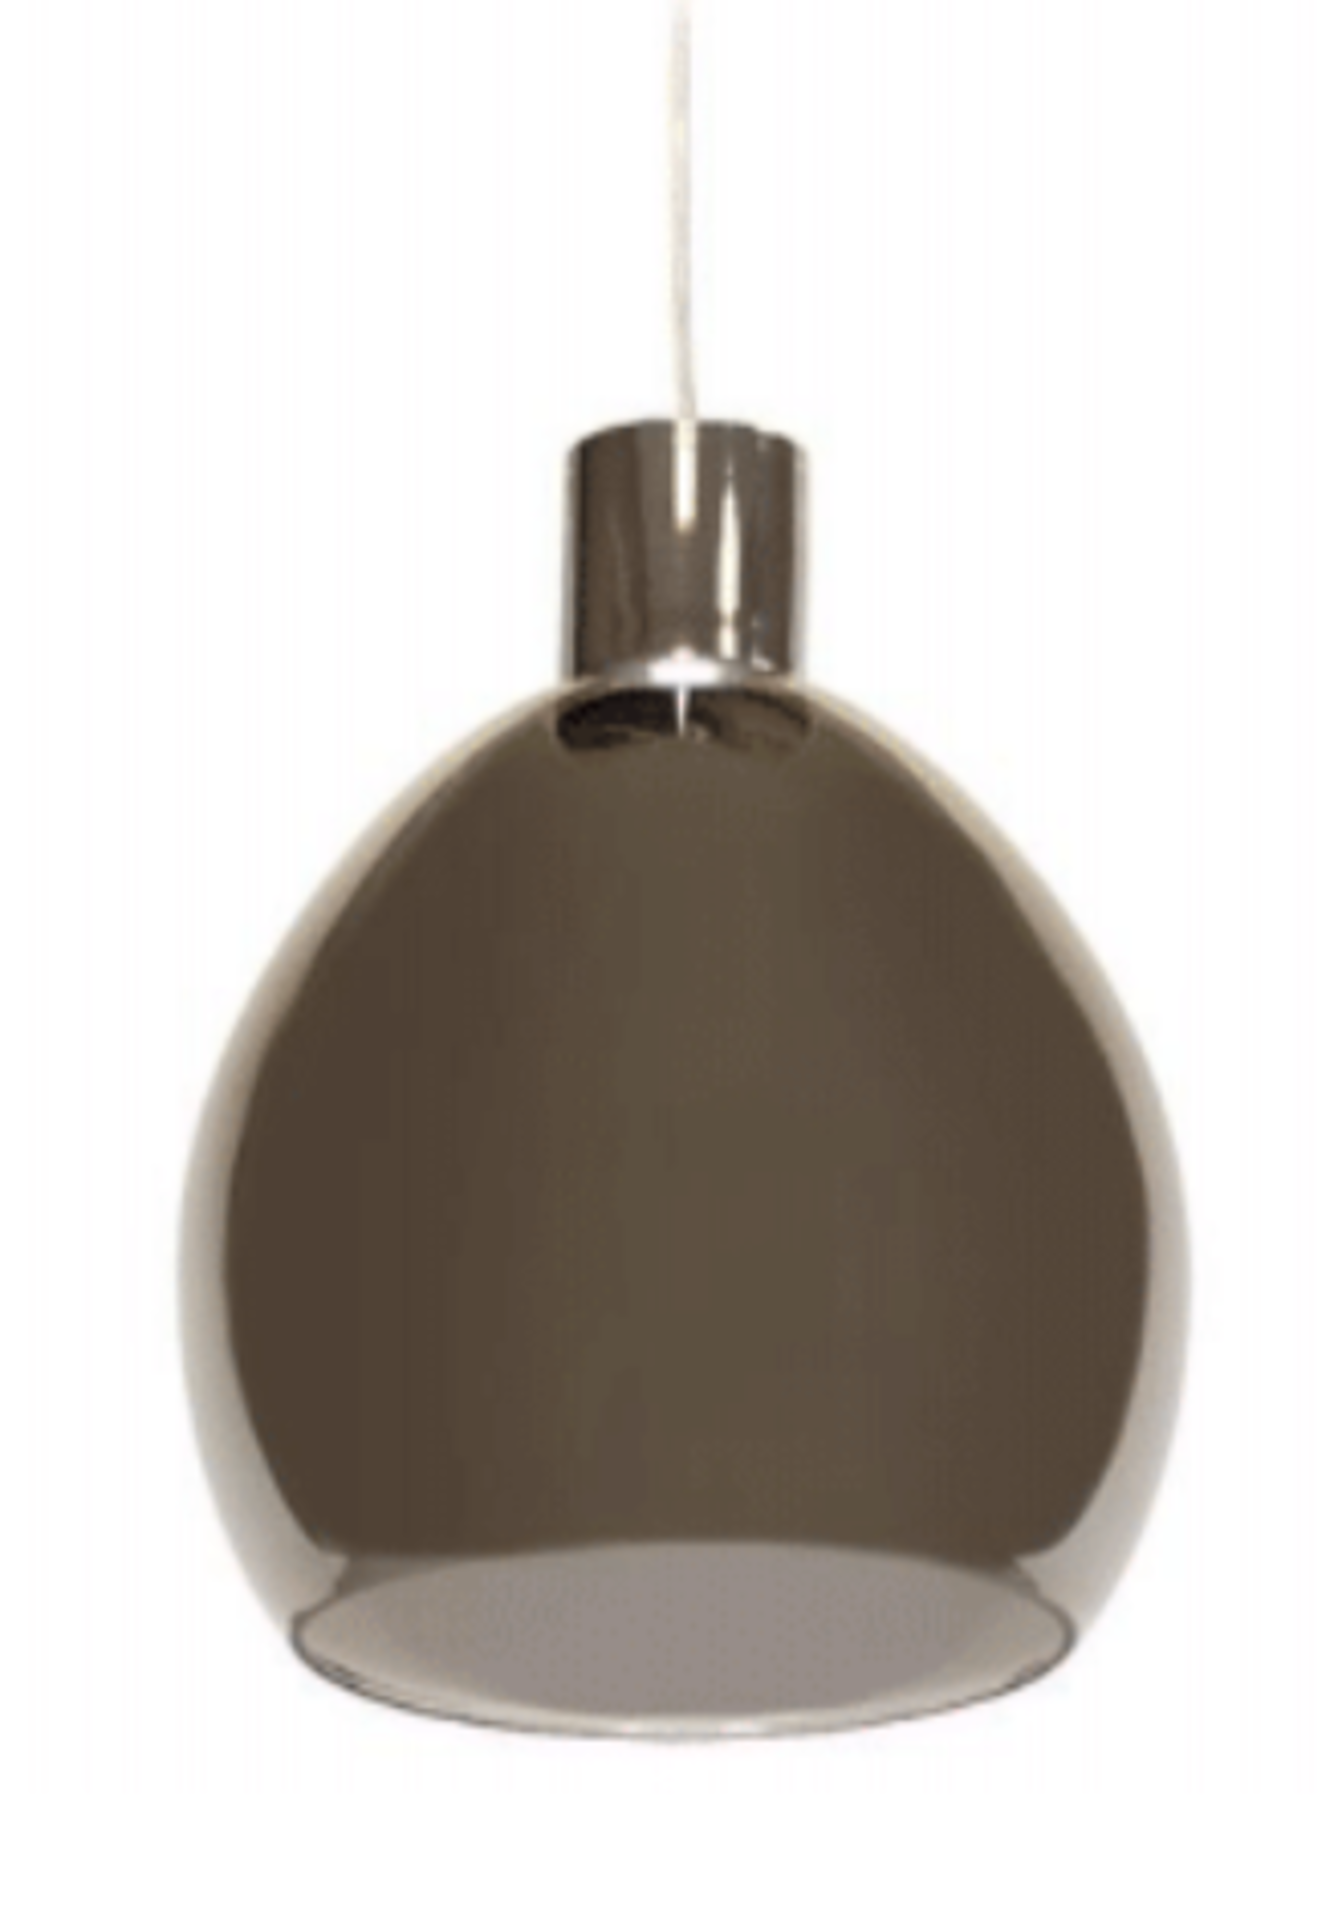 2 X BRAND NEW GRECO 250MM CEILING PENDANT LIGHTS RRP £96 EACH S1RA